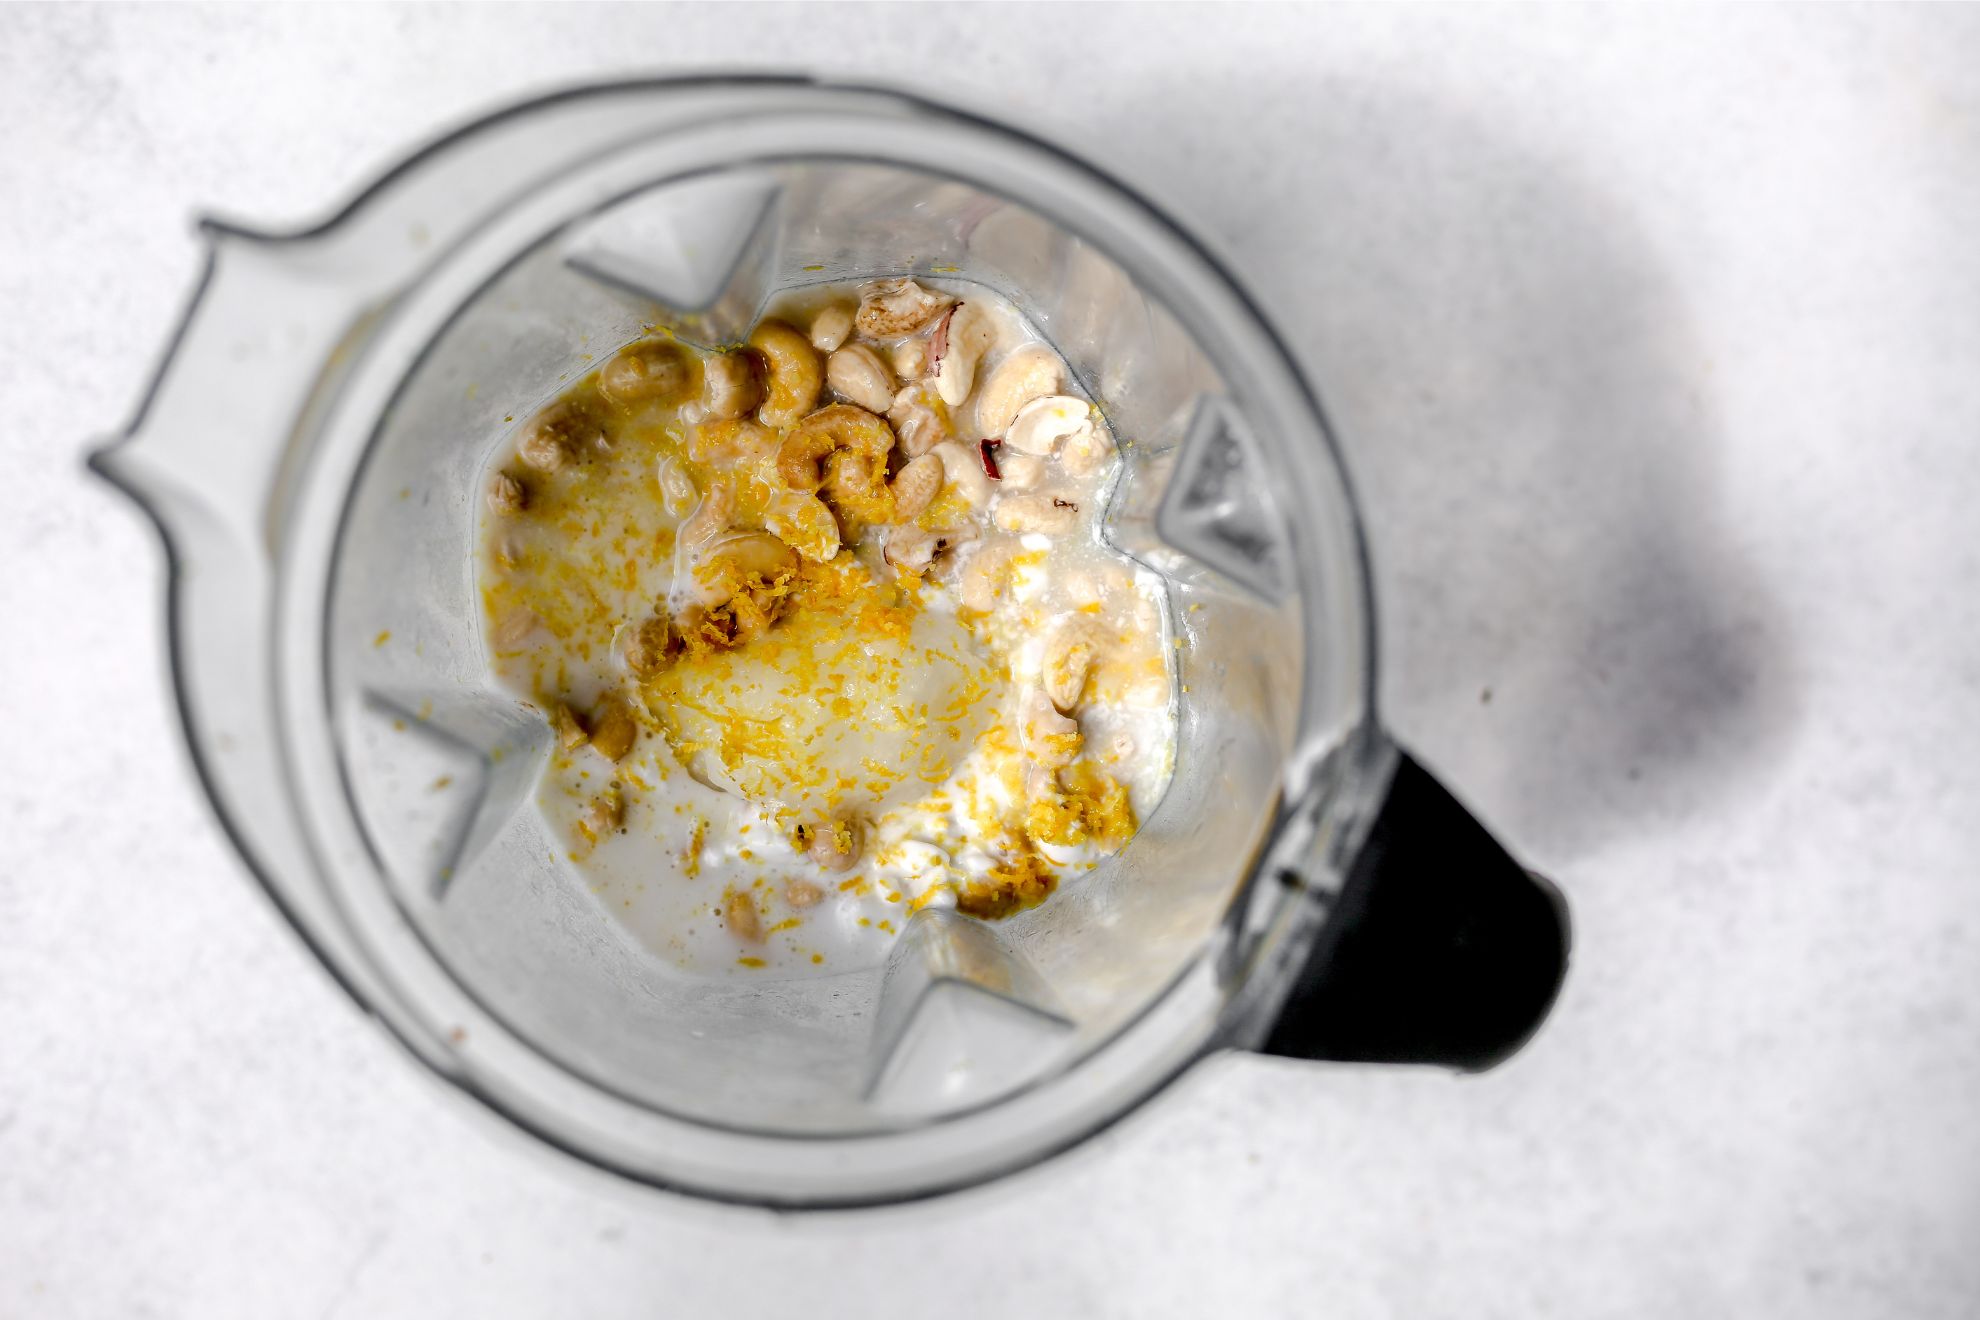 This is an overhead horizontal image looking into a blender. The blender sits on a white surface with ingredients in it. The ingredients appear to be cashews, milk, and lemon zest.